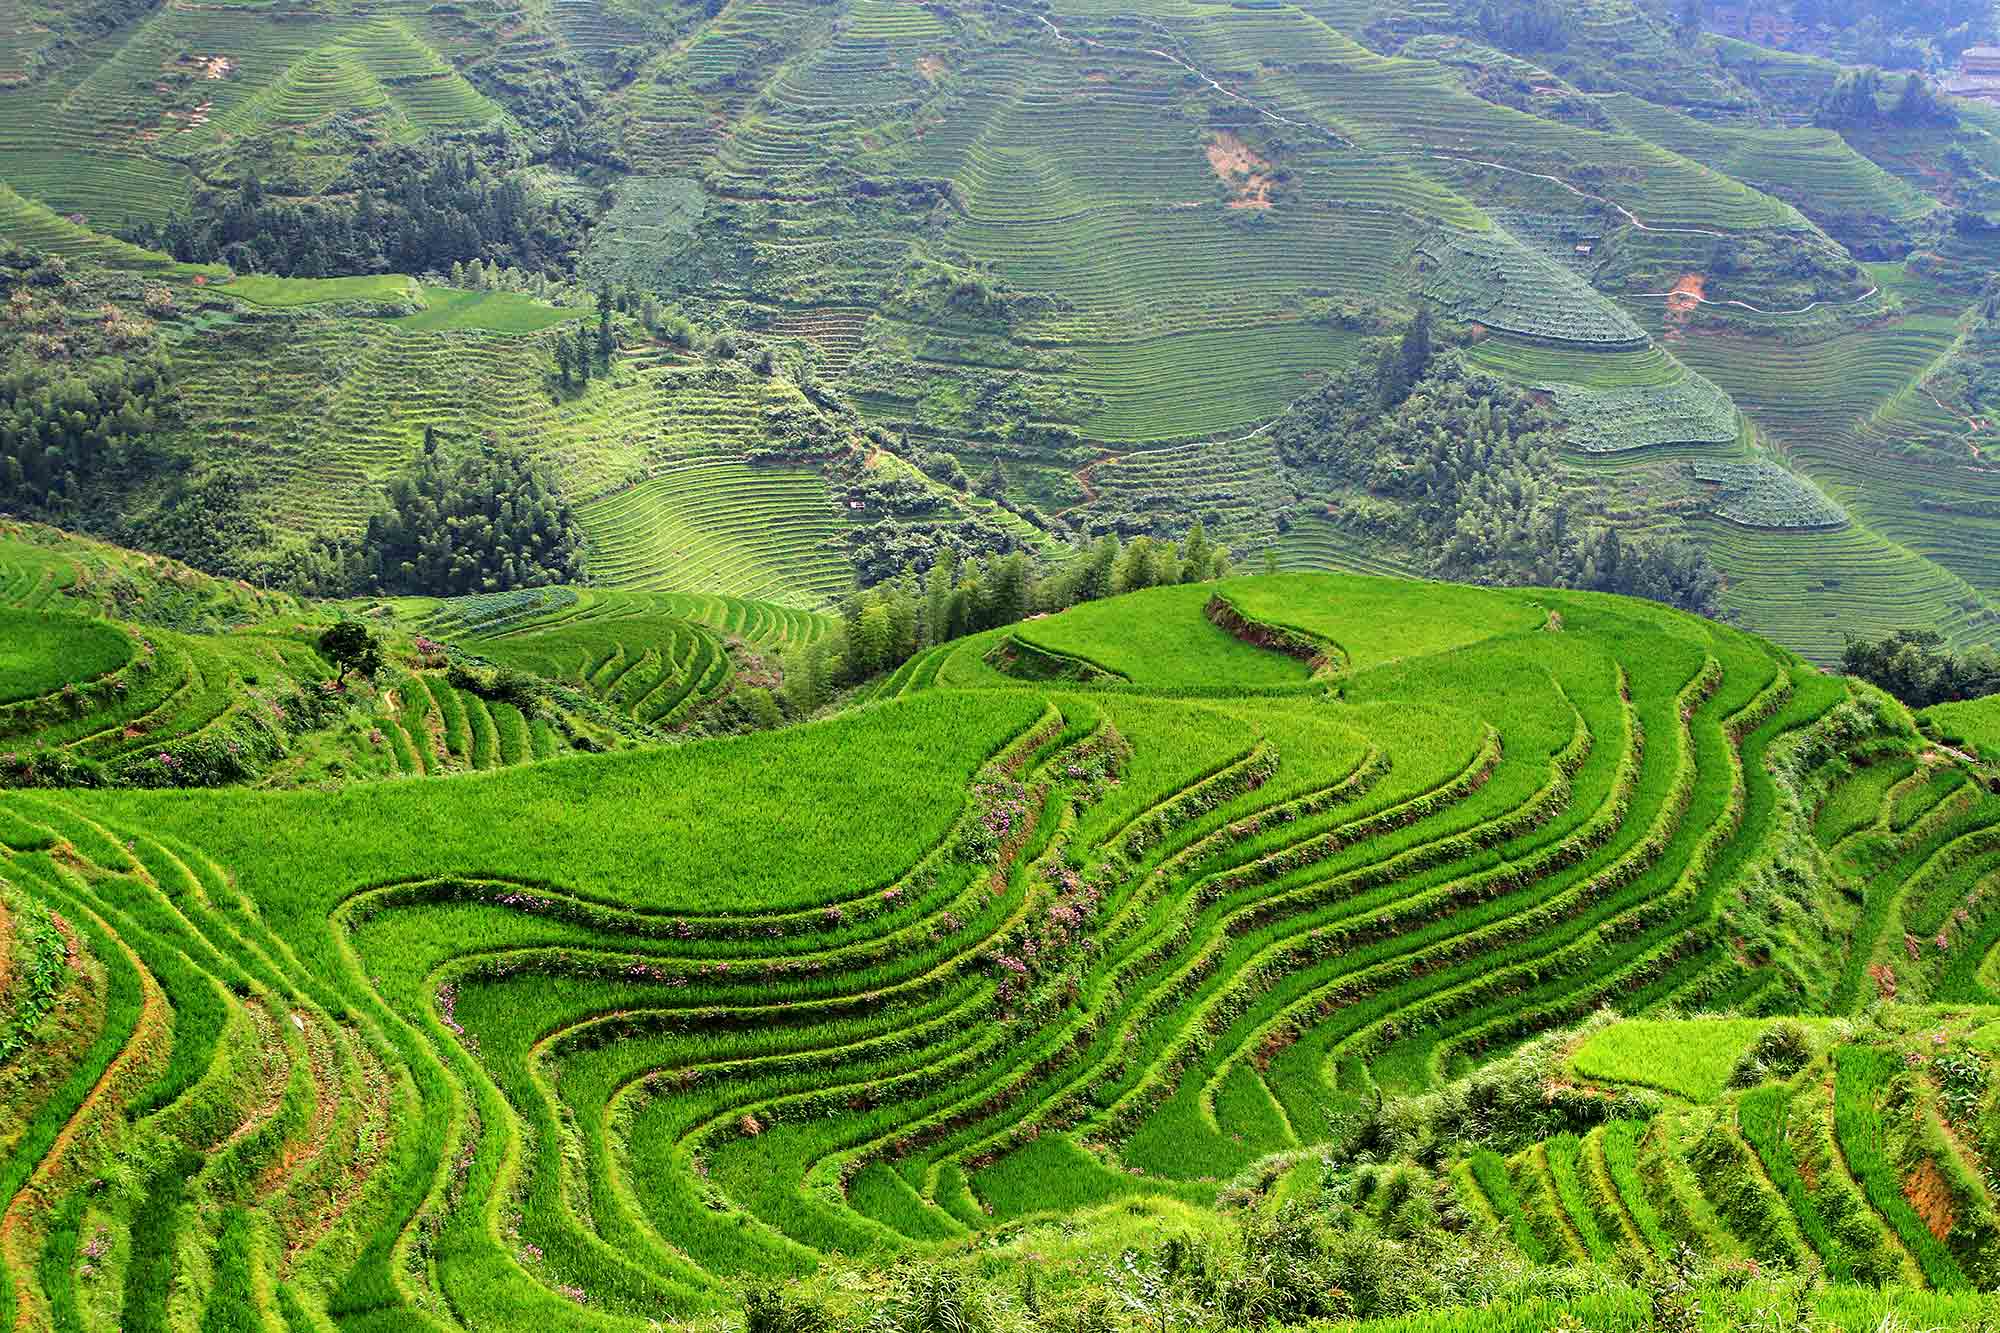 Rice Terrace Pics, Man Made Collection